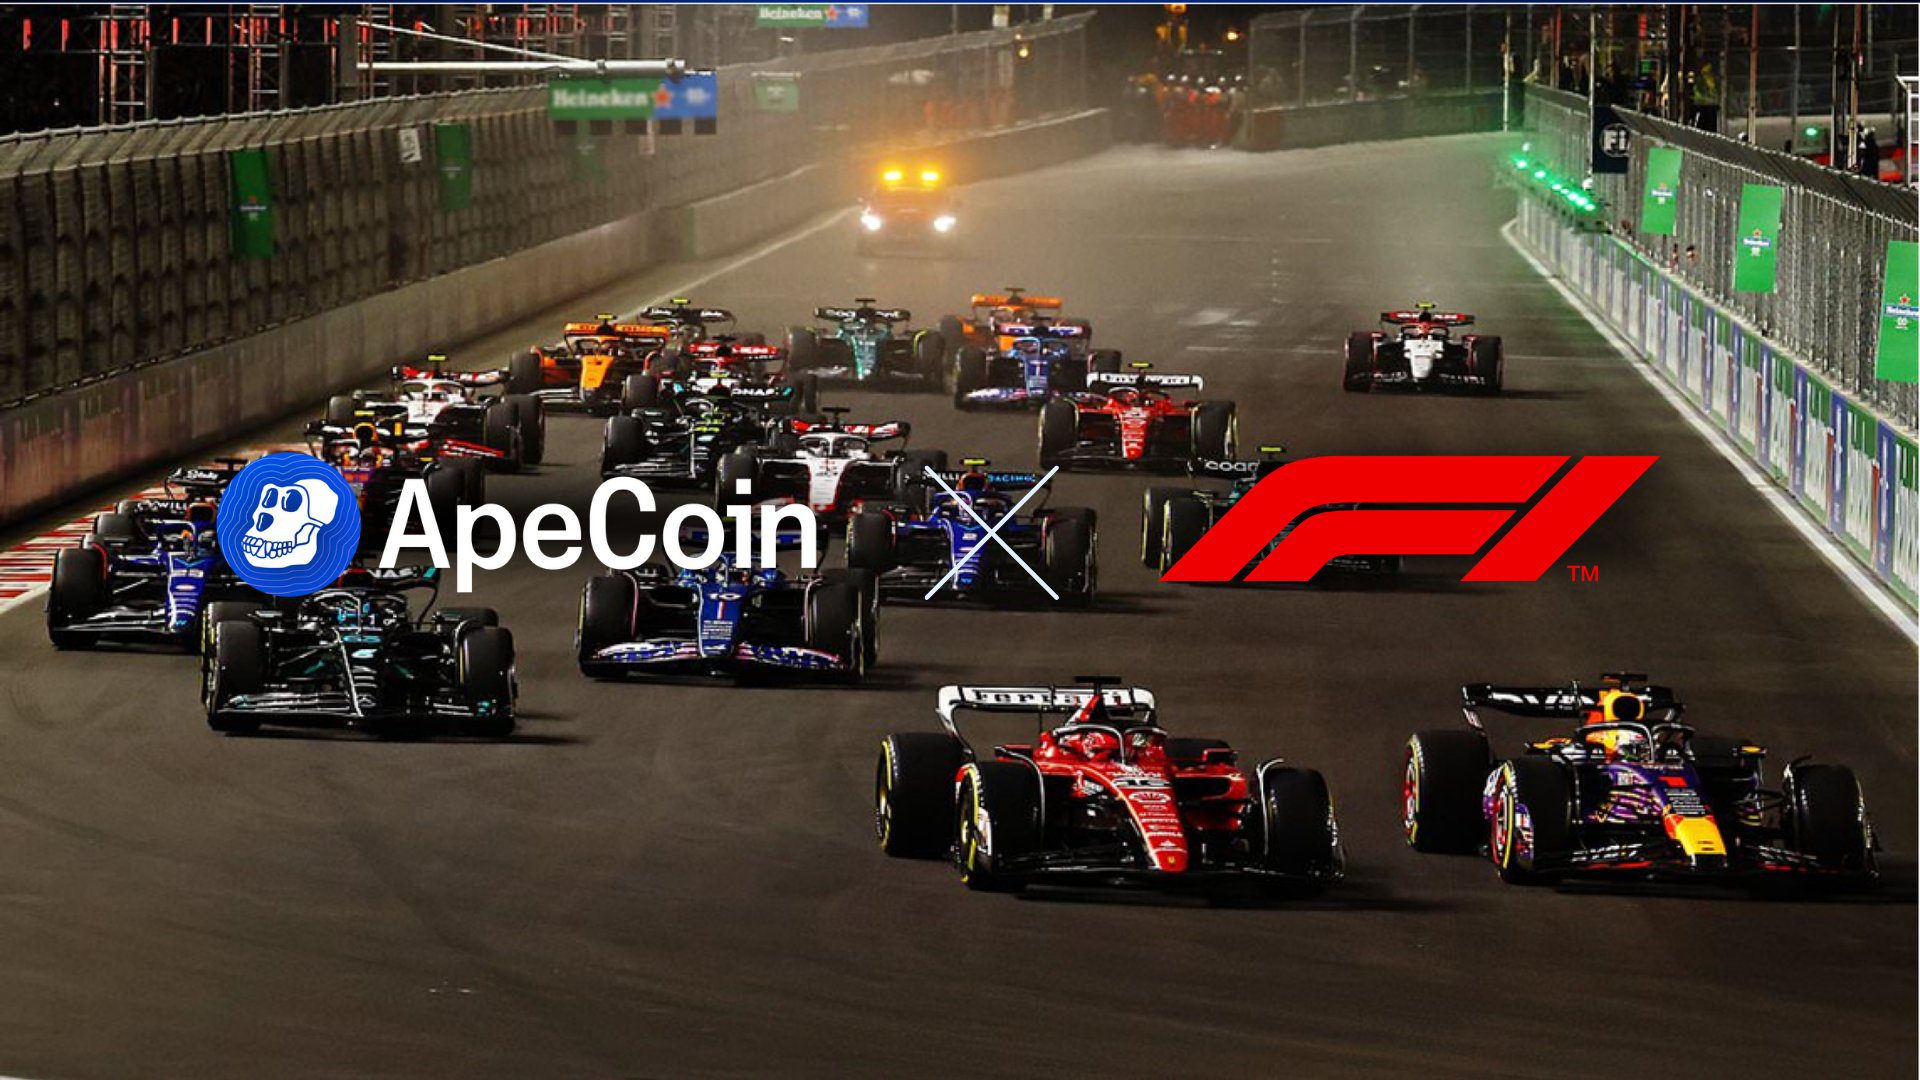 ApeCoin DAO’s Thrilling Venture into F1: A Multi-Year Partnership with [Redacted]